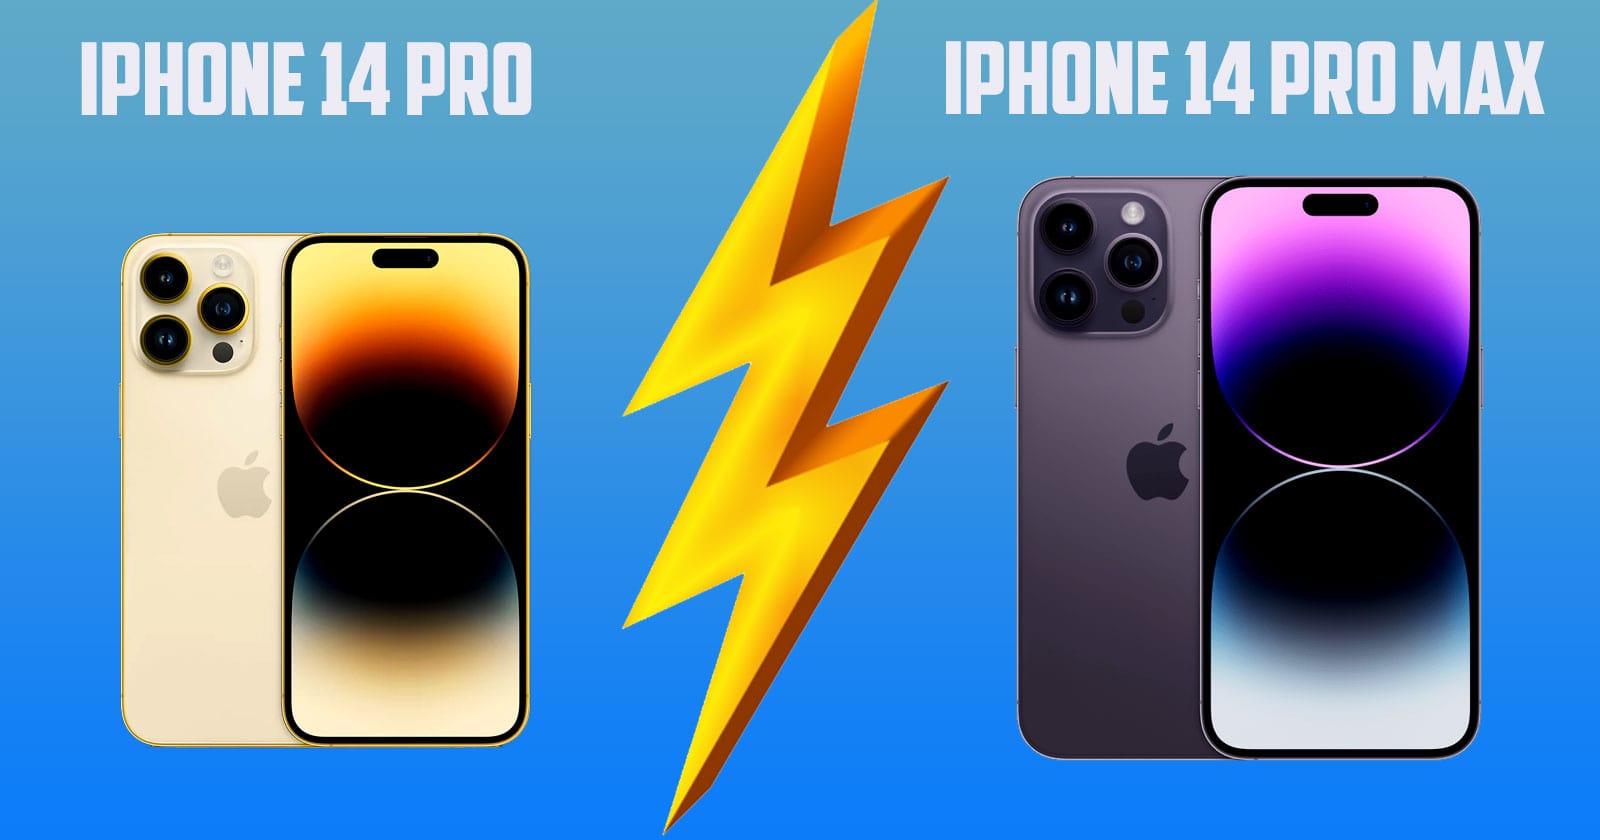 What Is the Difference Between iPhone 14 Pro and Pro Max